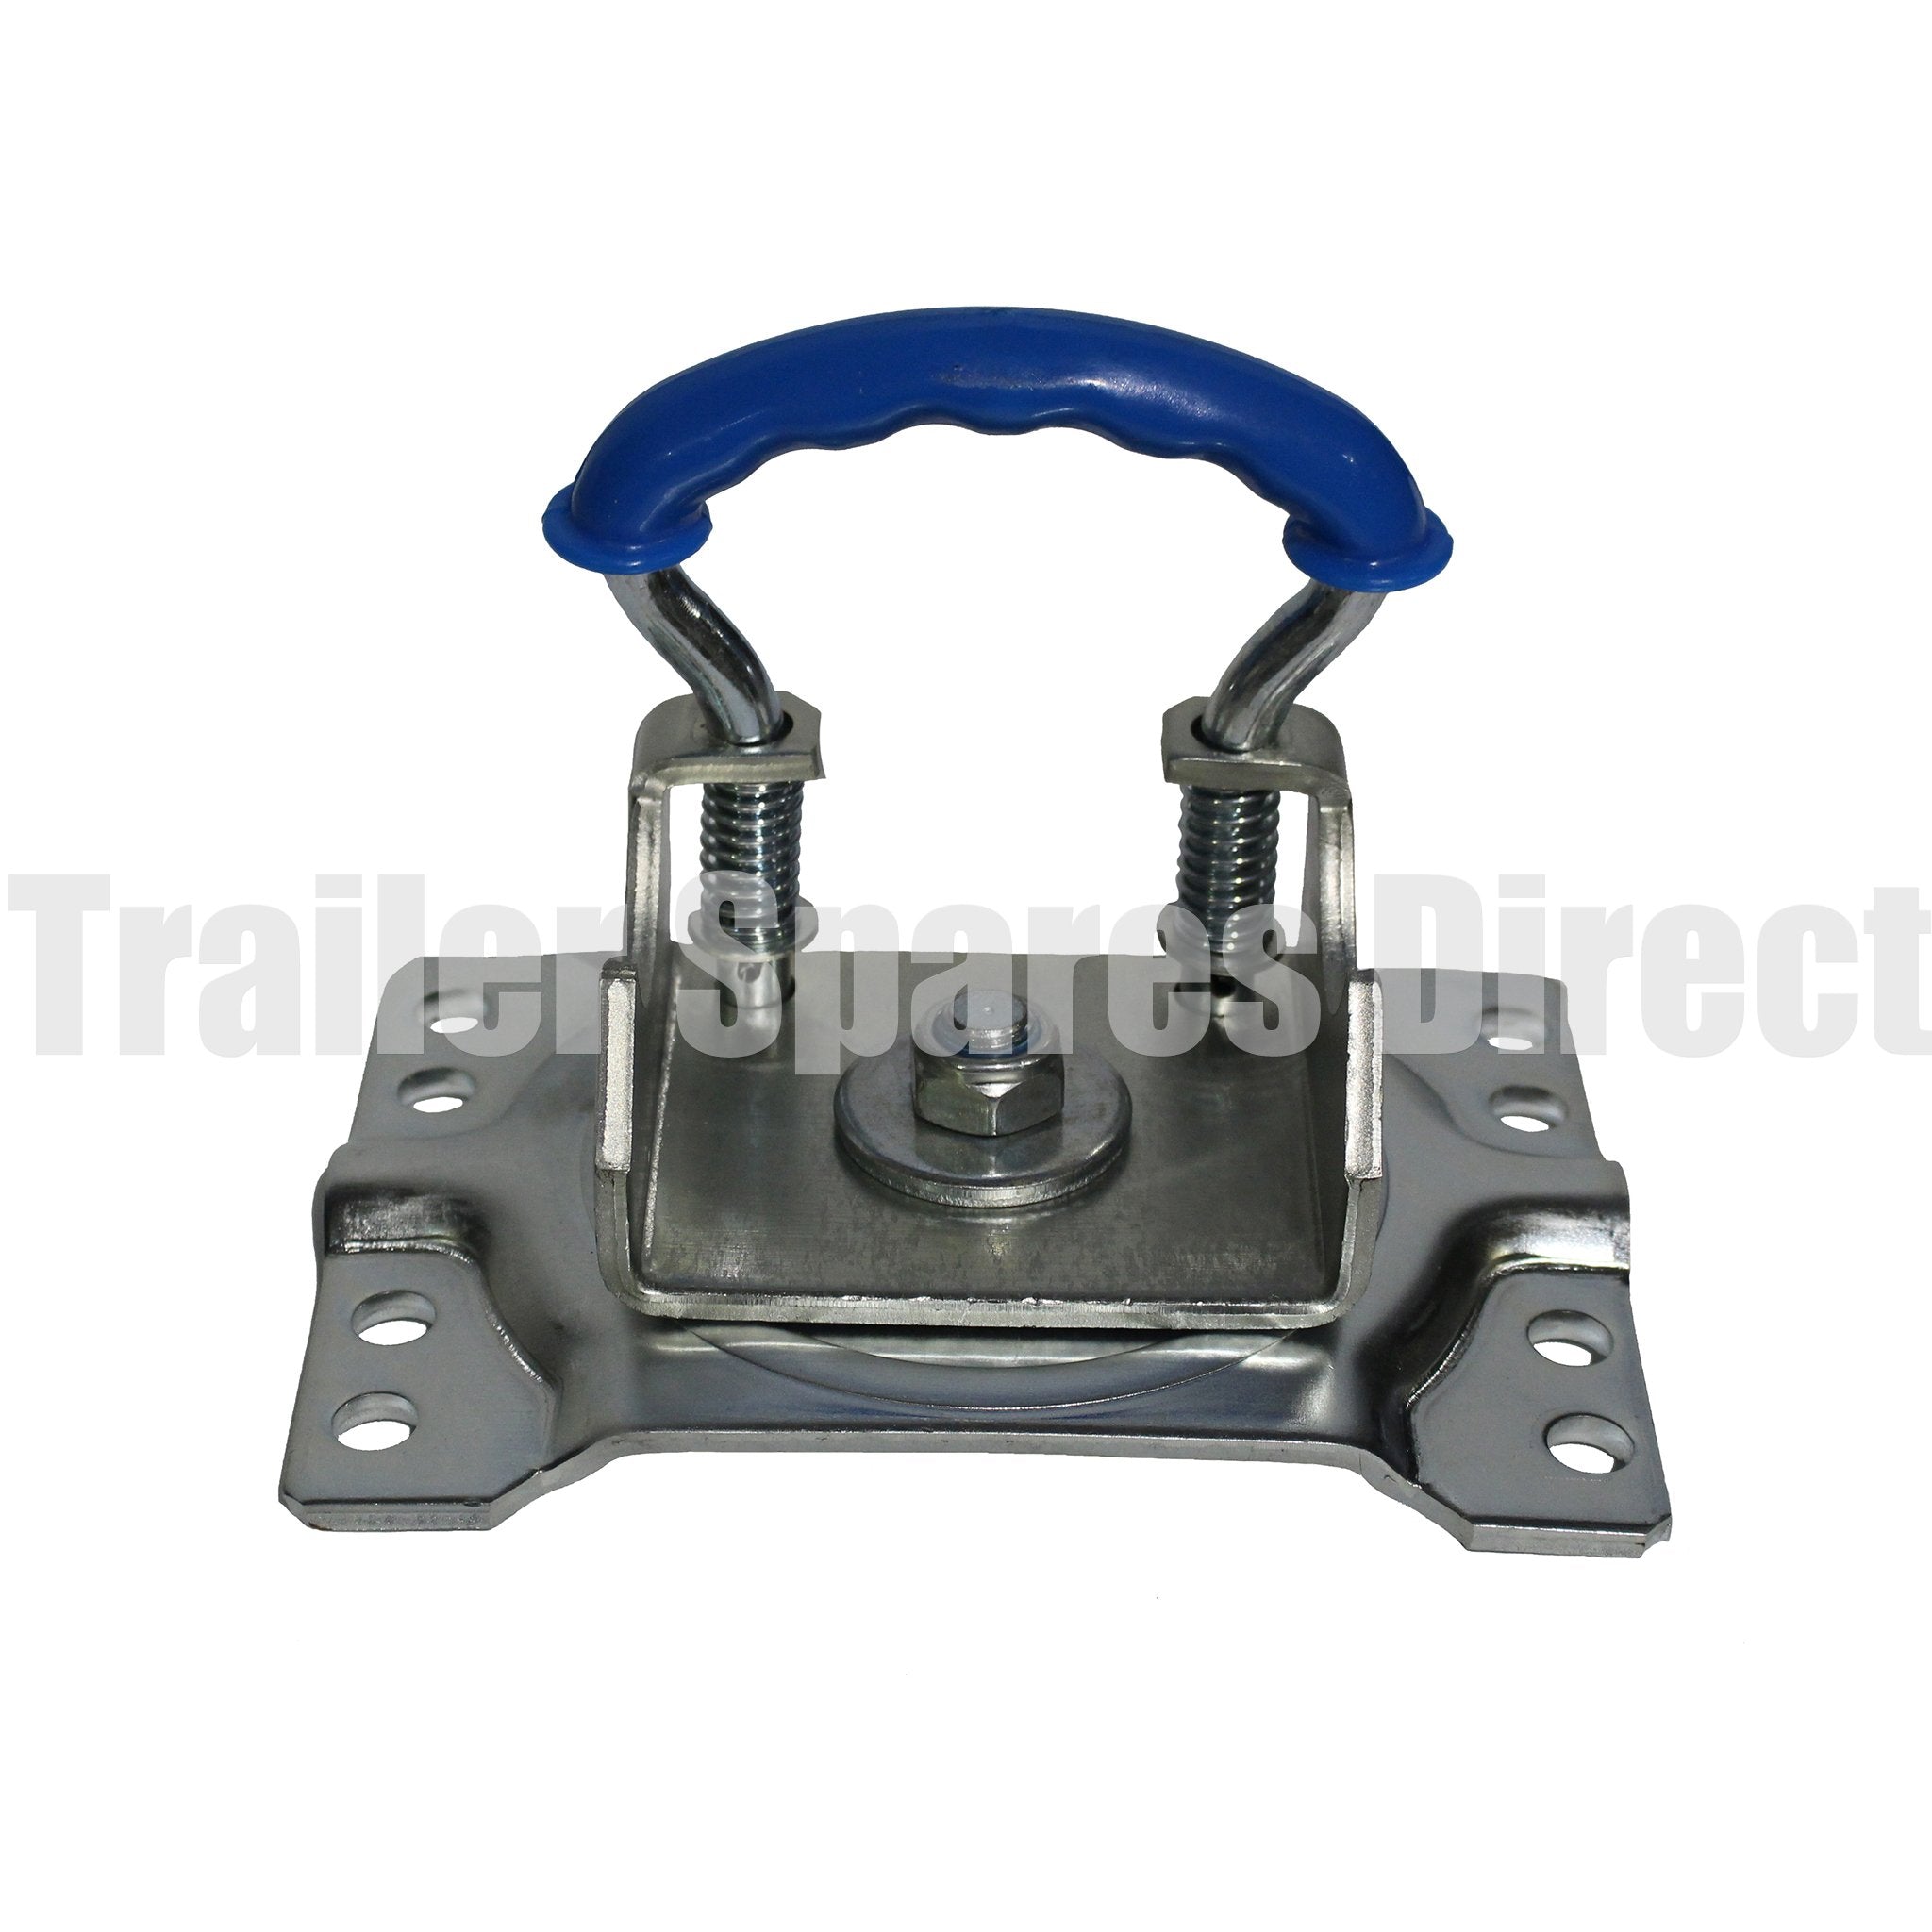 Swivel clamp with 8 holes